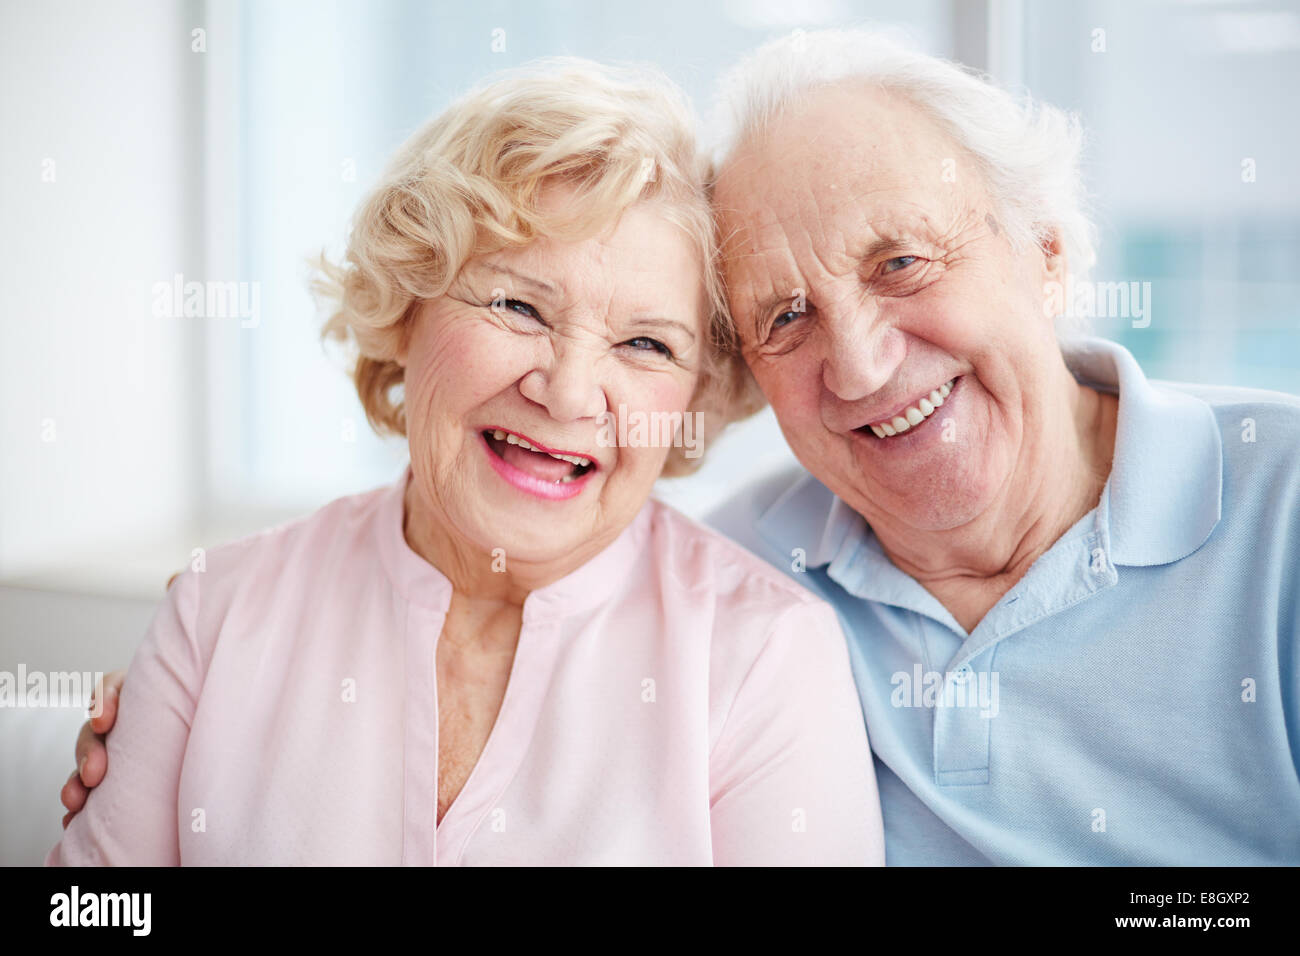 Portrait of a positive senior couple looking at camera and smiling Stock Photo